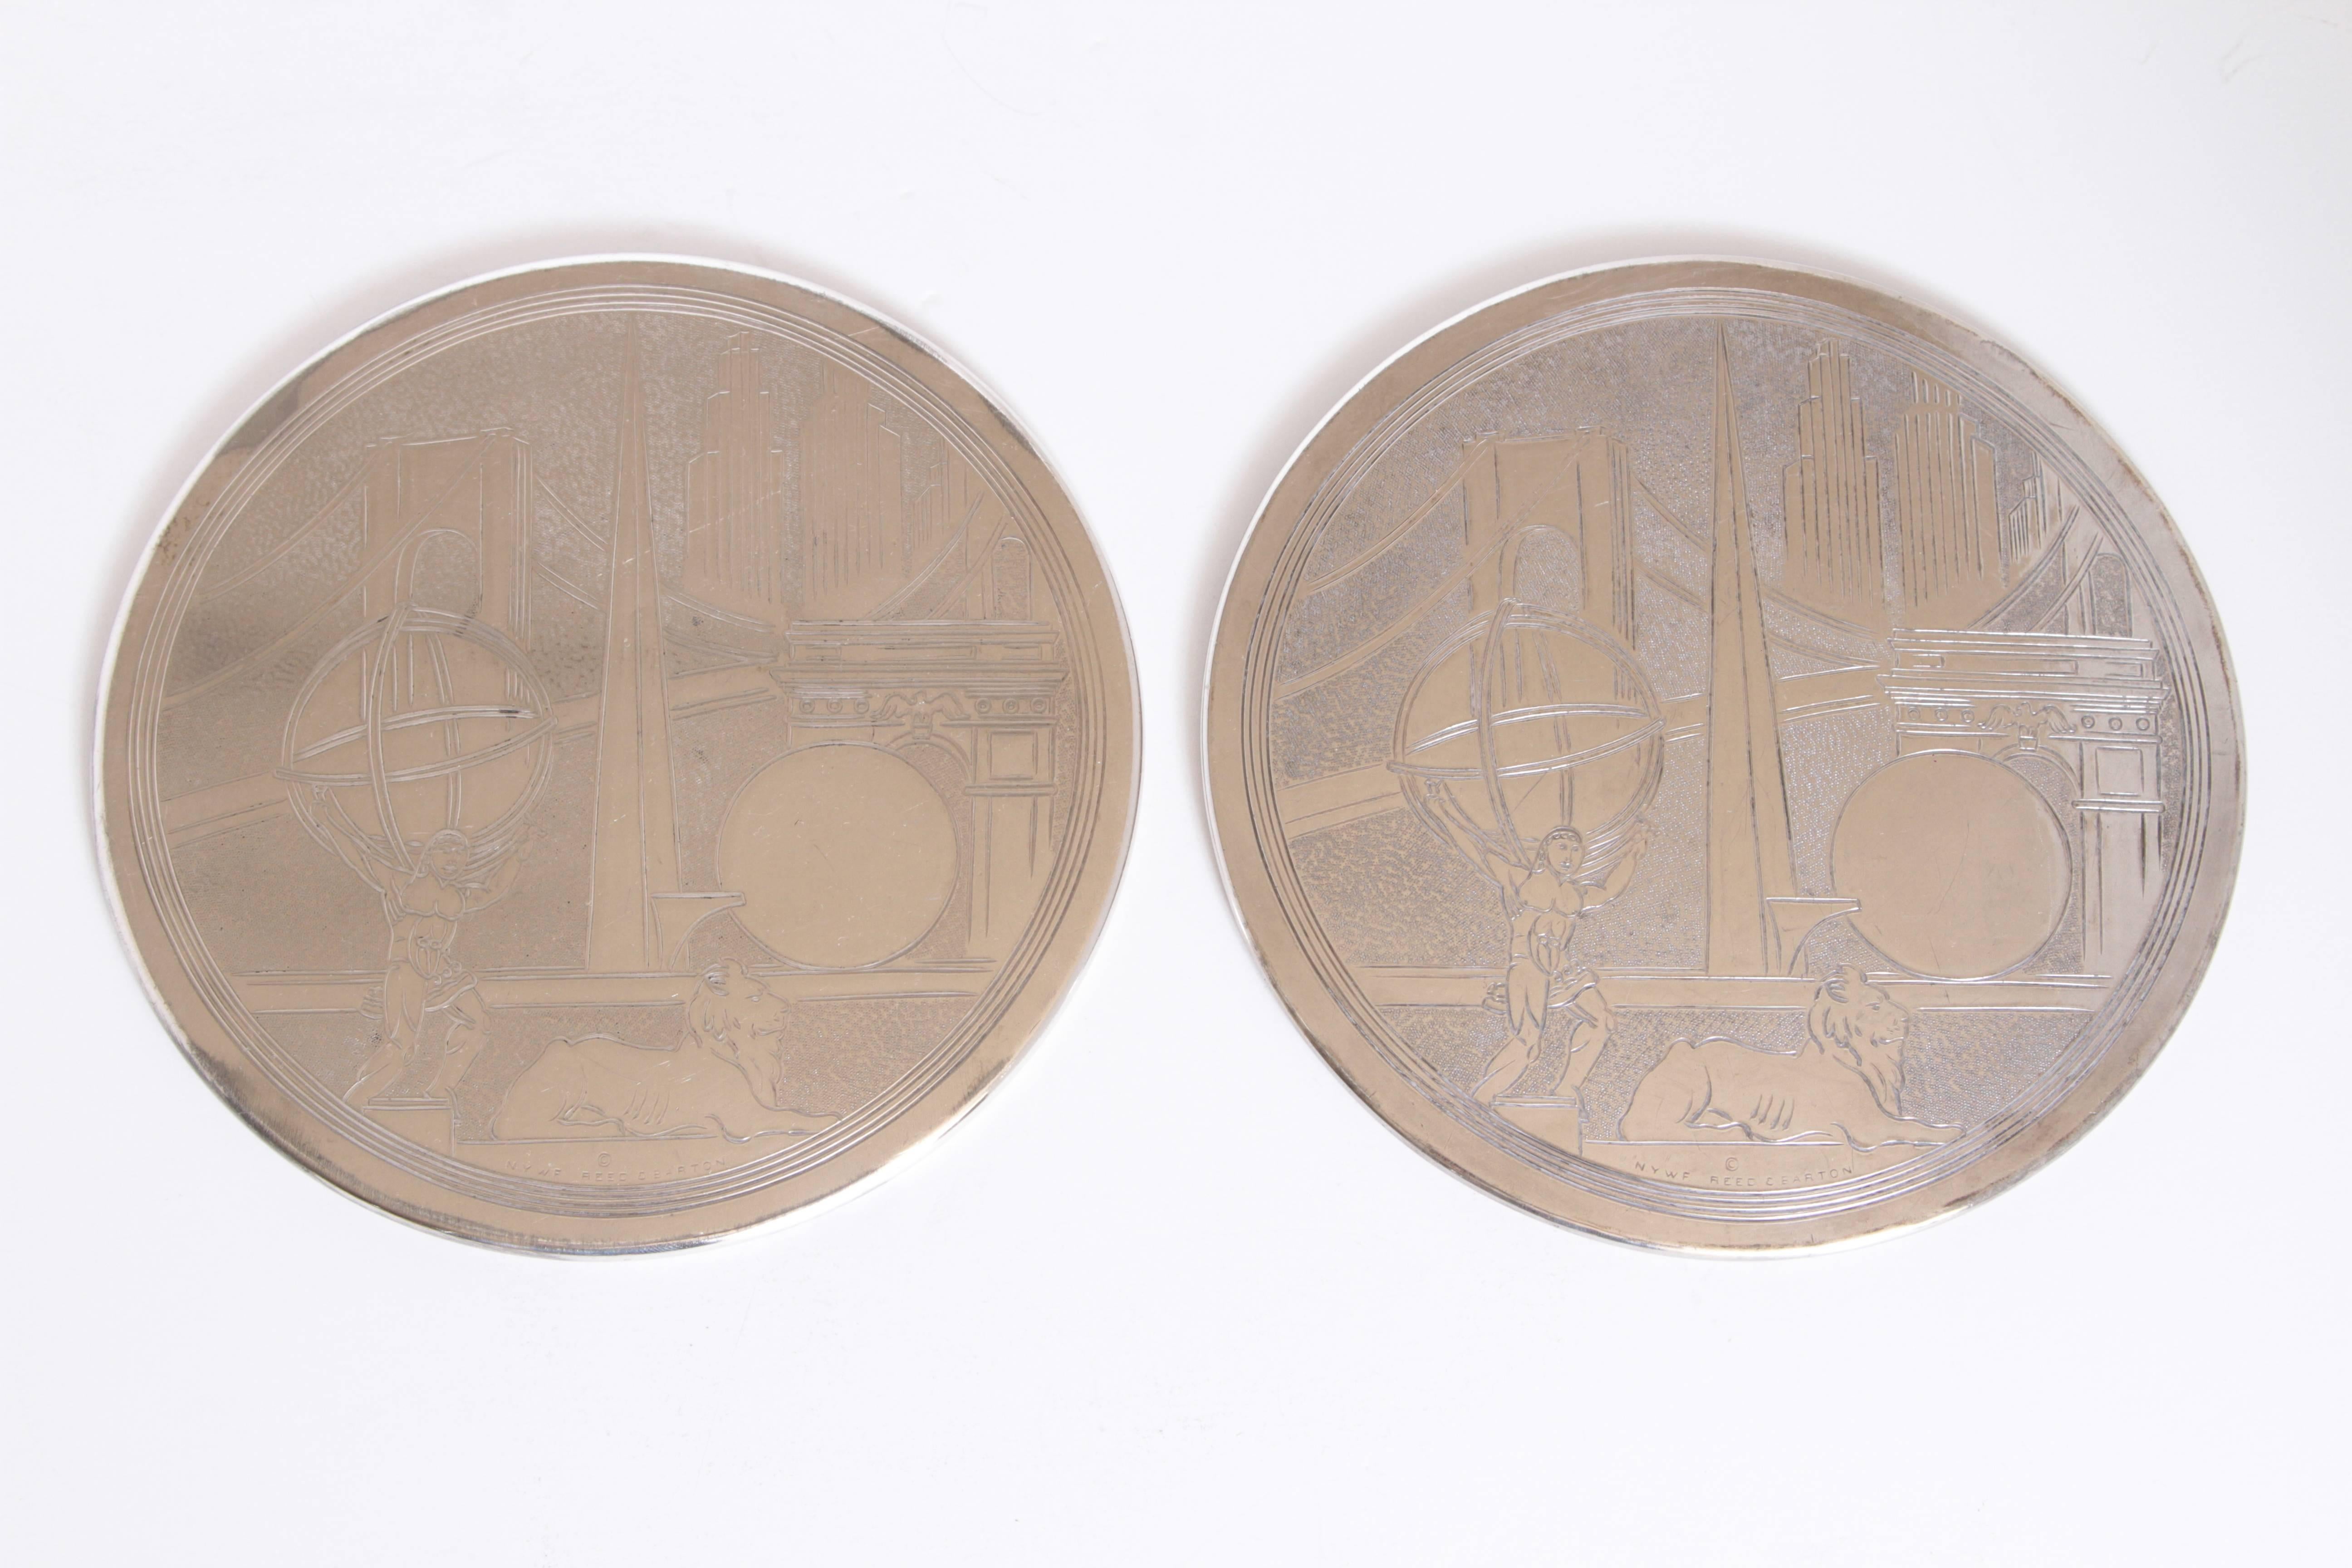 Machine Age Art Deco, New York World's fair silver plate trivets by Reed & Barton

Two rare individual serving trivets by Reed & Barton. 
Featuring incised examples of the Trylon and Perishphere, Brooklyn Bridge, Manhattan skyscrapers and